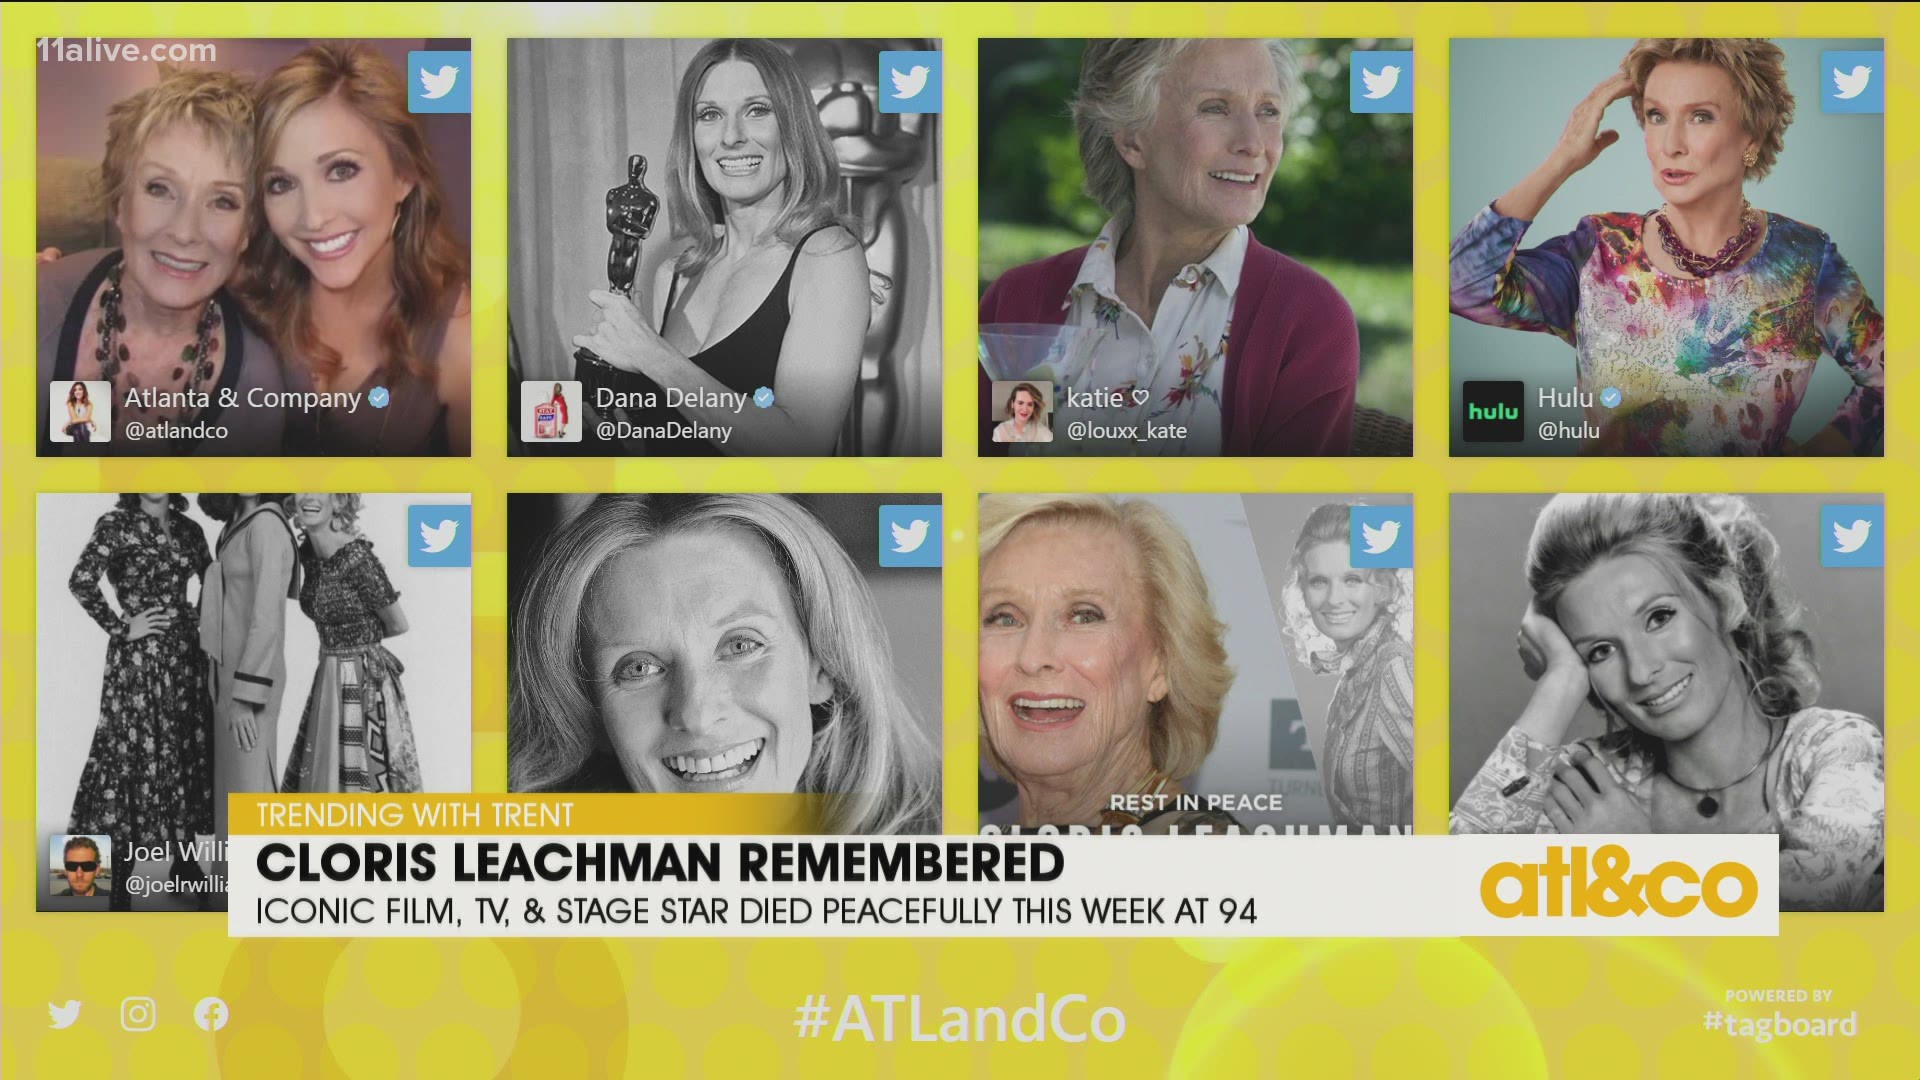 Oscar and 9-time Emmy-winning actress Cloris Leachman passed away at the age of 94 after dazzling us on stage and screen for over 7 decades.